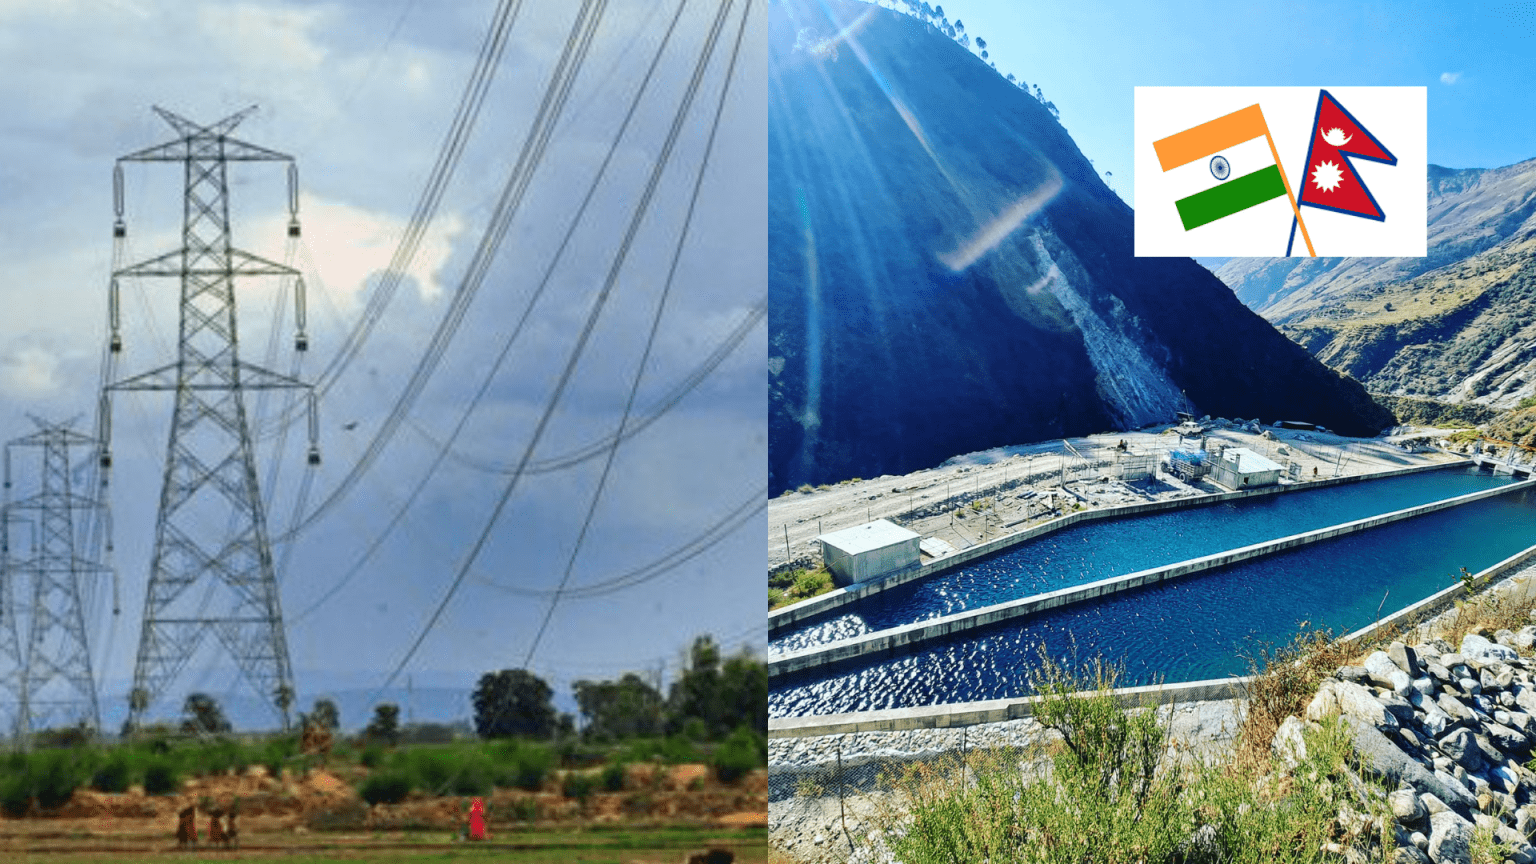 The Importance of Nepal’s Cross-Border Trade of Hydropower is decreasing due to Poor Diplomacy